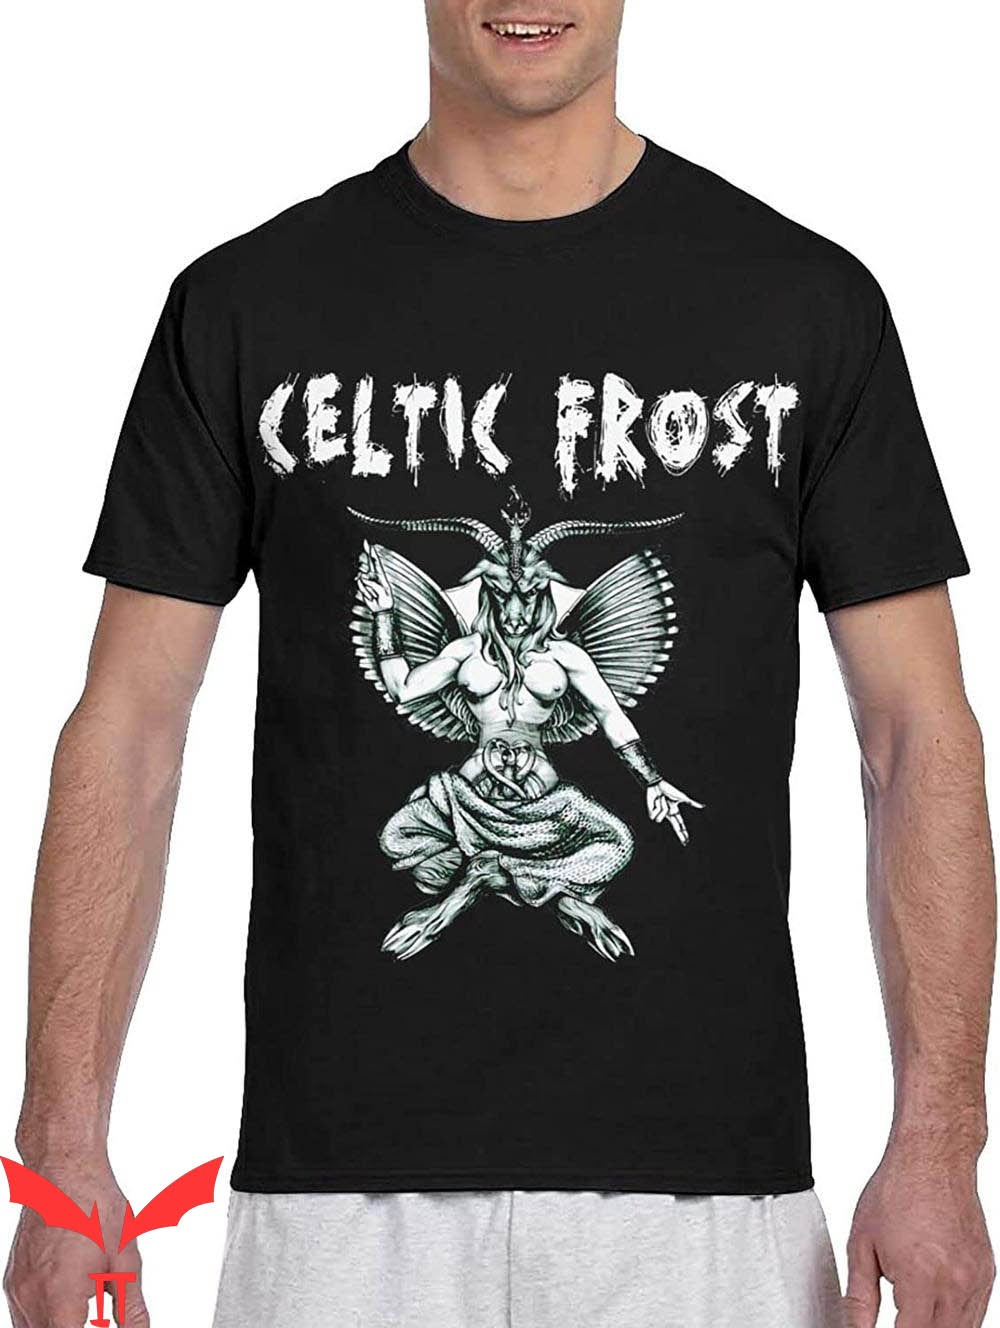 Celtic Frost T-Shirt Extreme Metal Band Cool Trendy Style